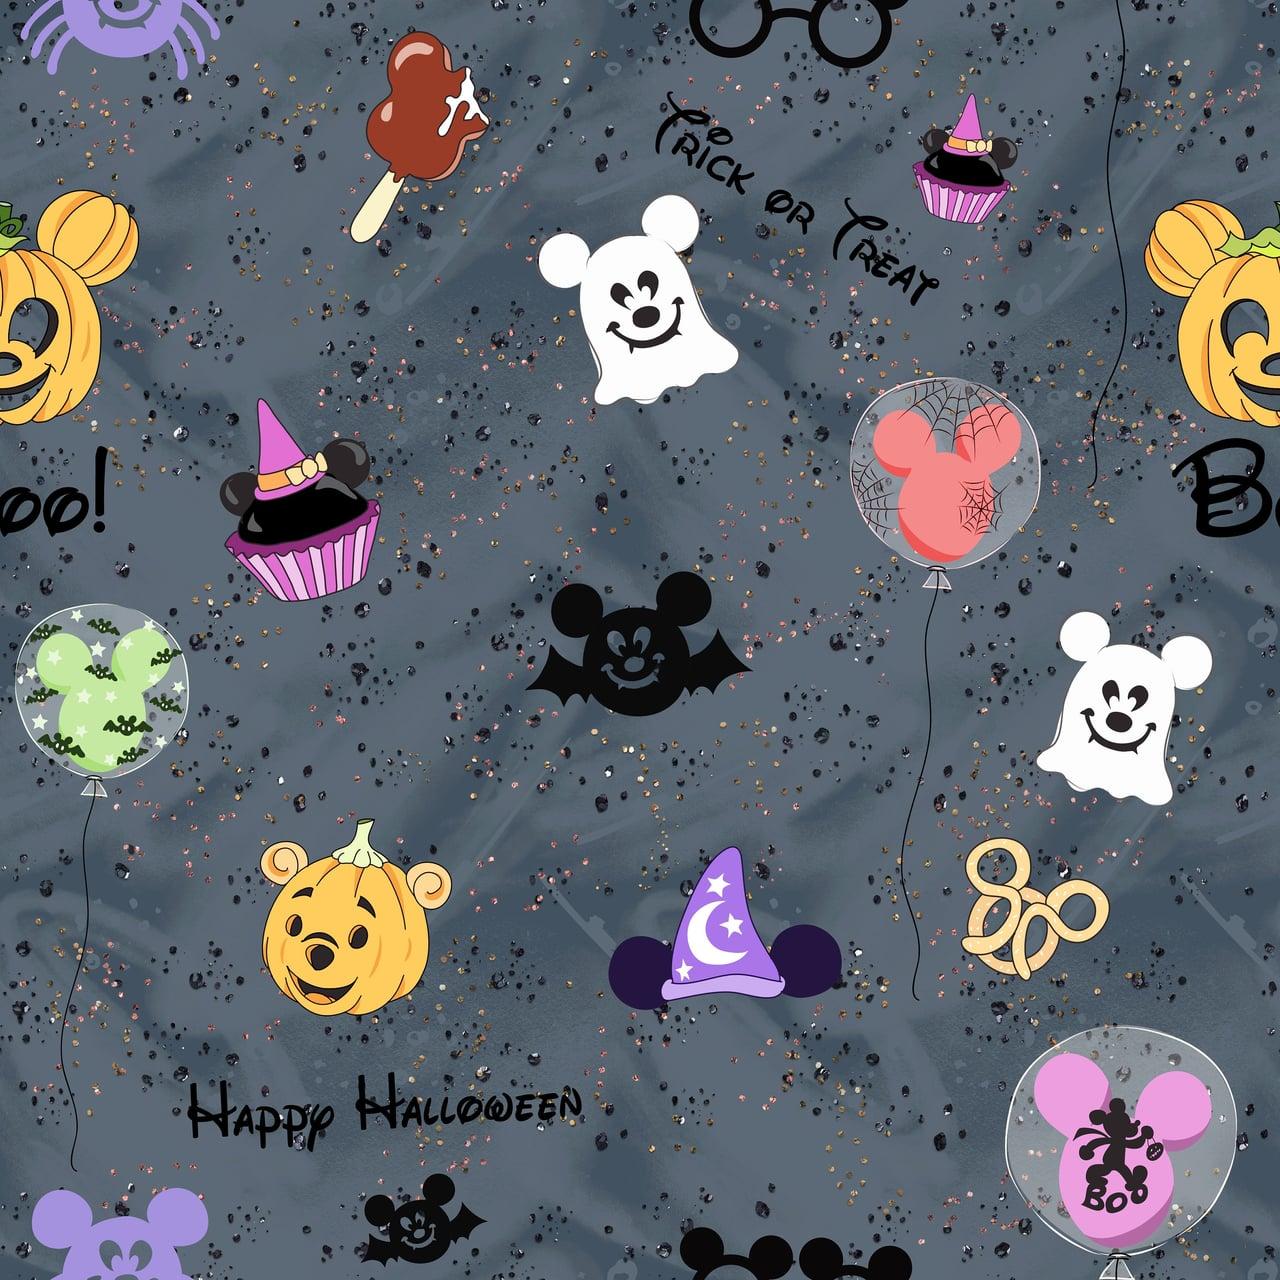 Mickey Mouse Halloween Backgrounds  Mickey Mouse Halloween Backdrop   Halloween  Aliexpress